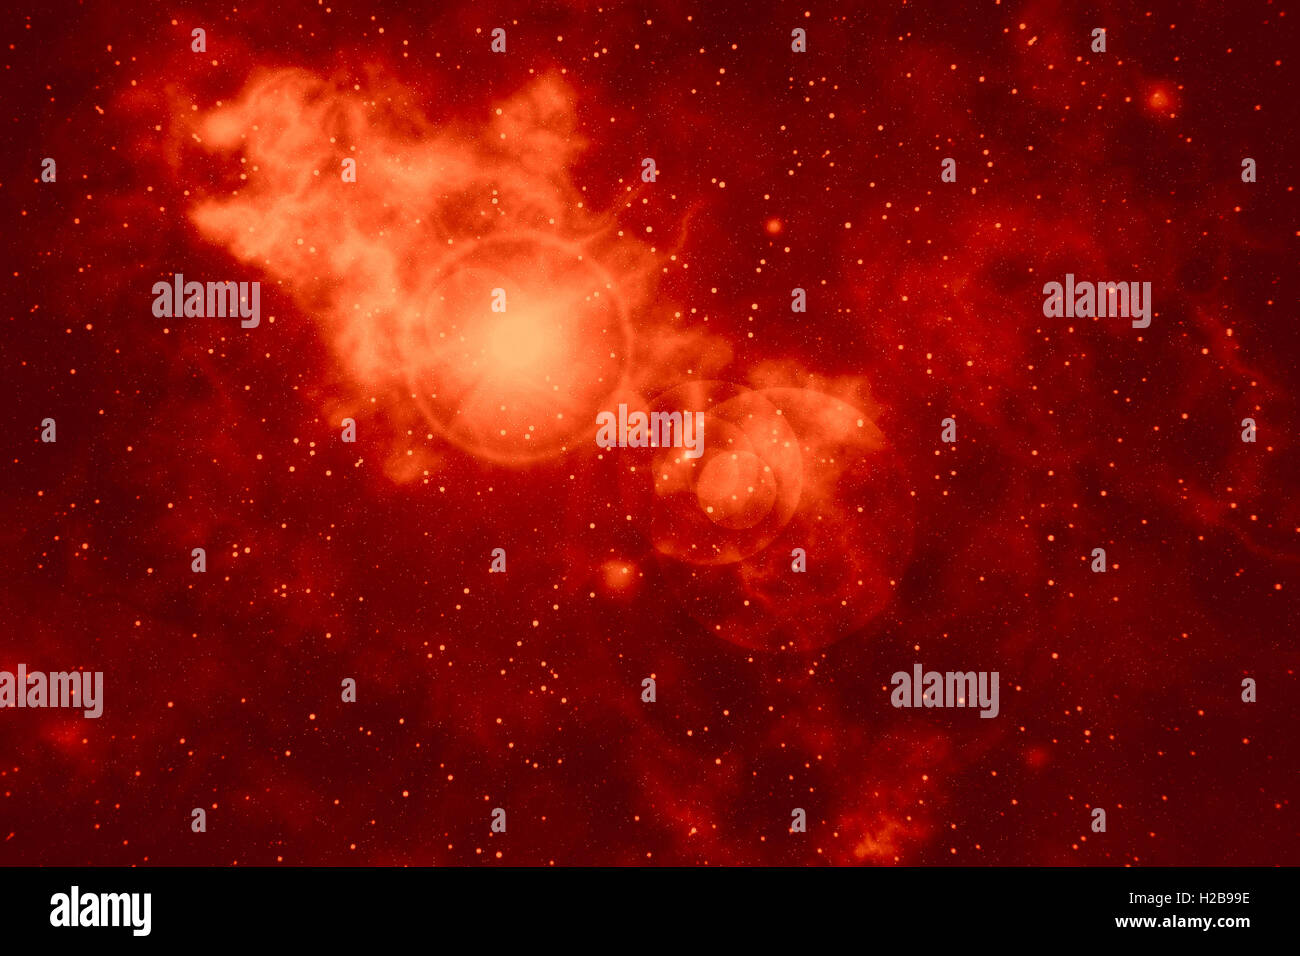 Background texture in red with artistic view on supernova explosion pattern. Can be used as a wallpaper. Stock Photo